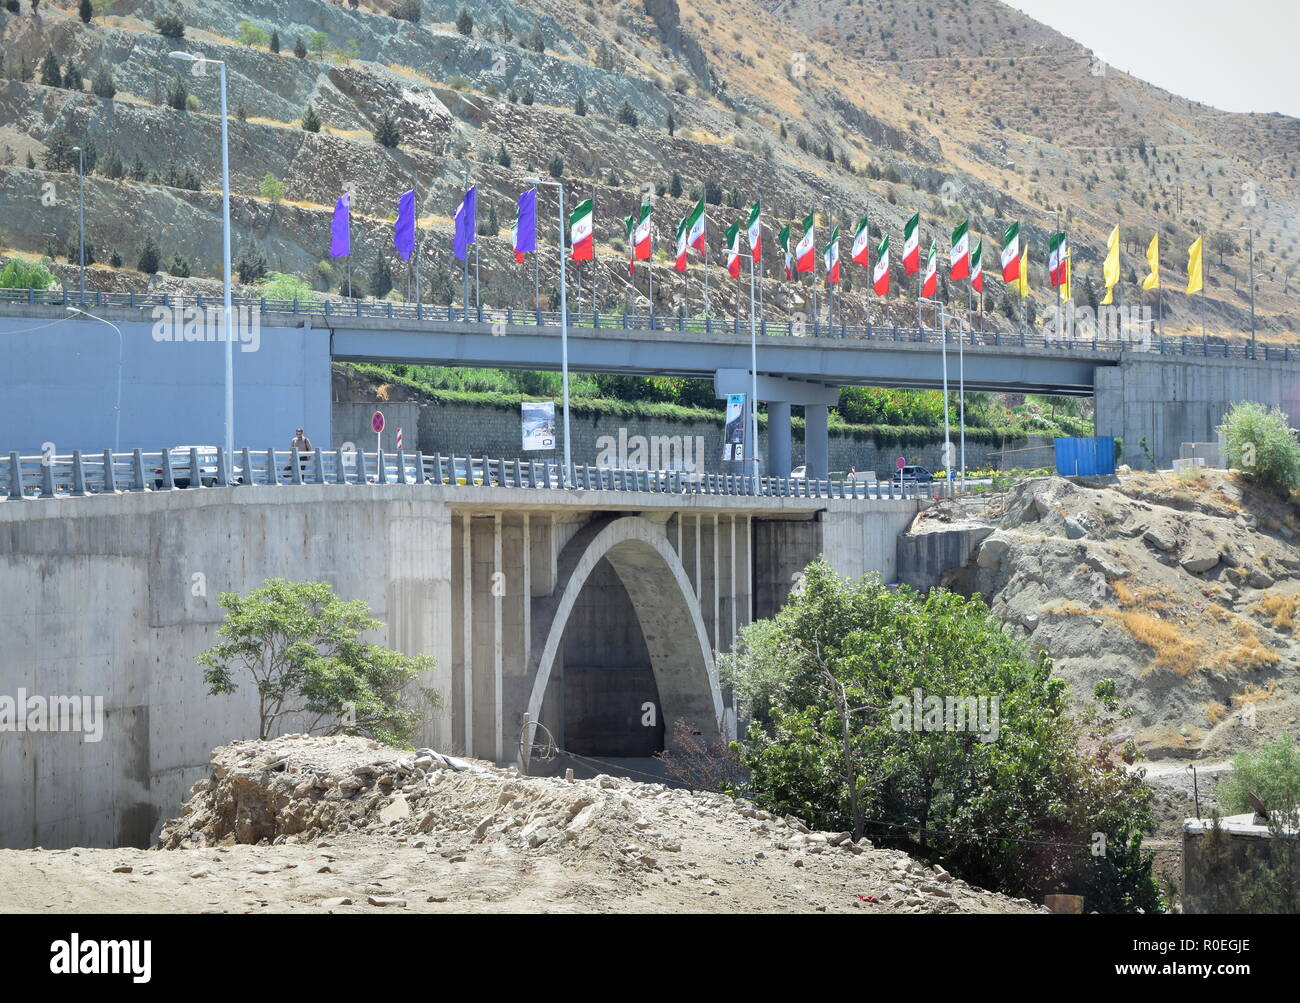 Large arch concrete bridge of a highway in Iran connecting the neighboring cities of Tehran and Karaj decorated with dozens of Iranian flags Stock Photo